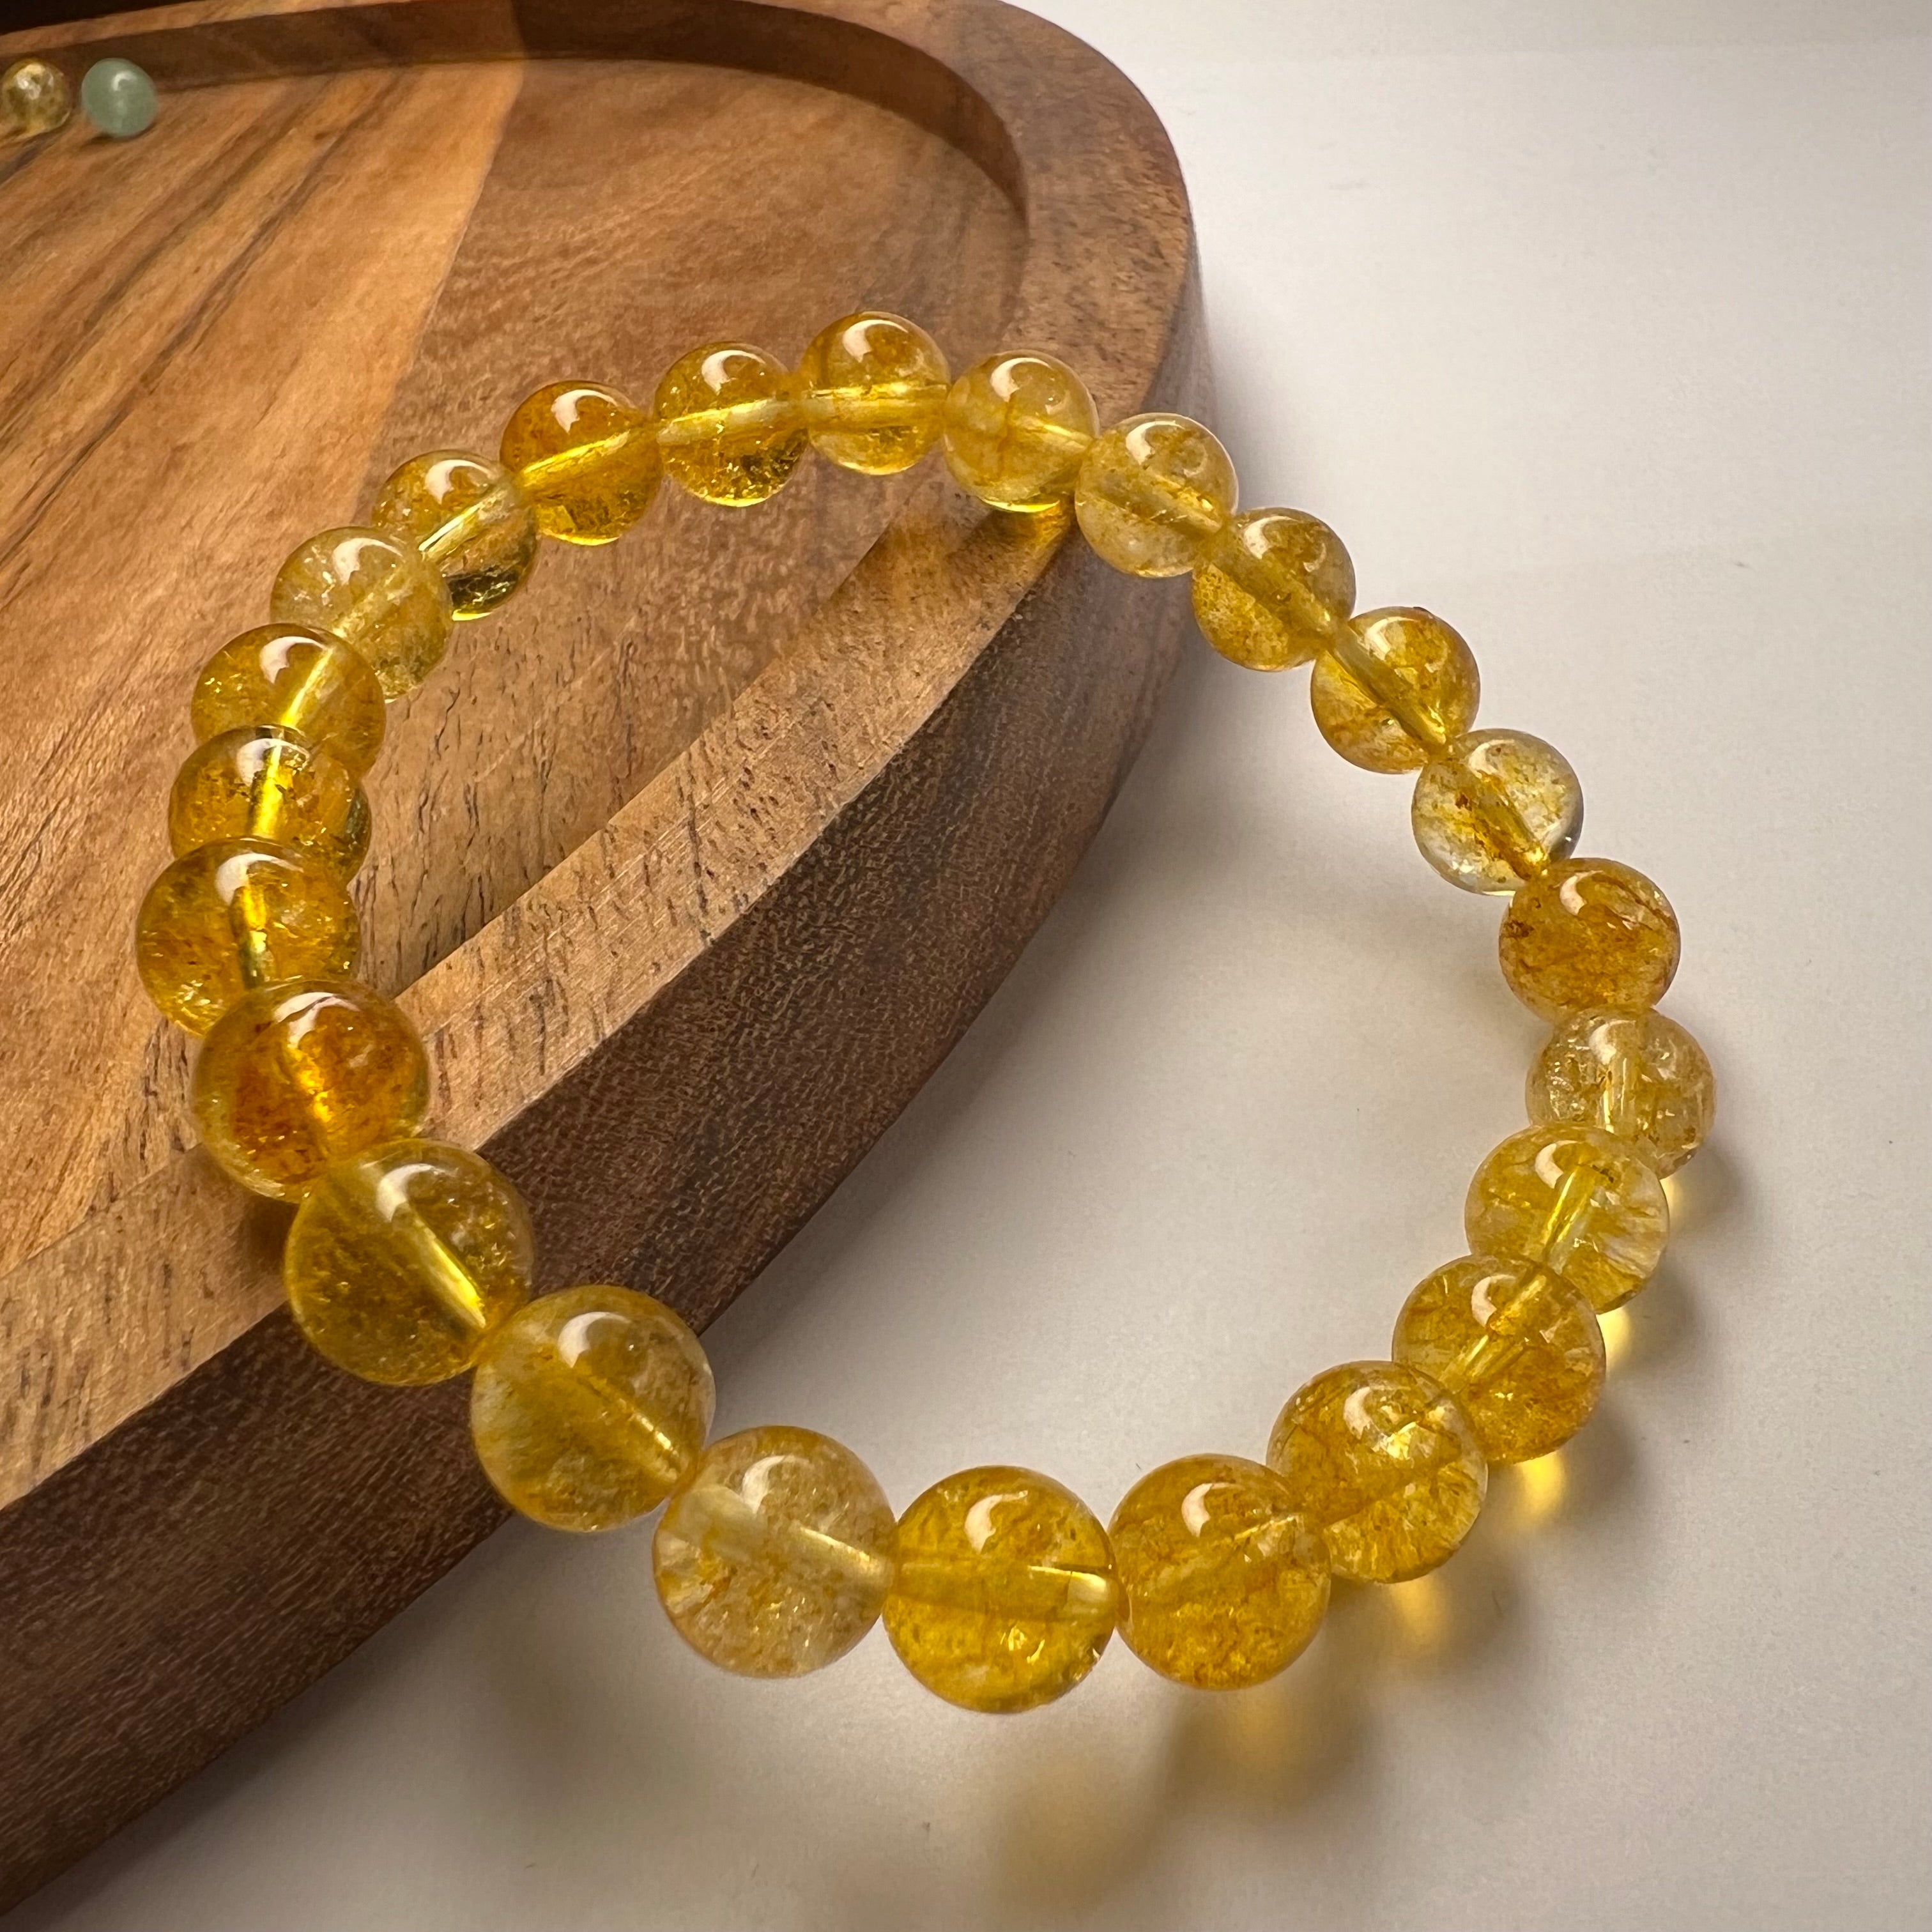 Amazon.com: BOGDAN Handmade Natural Citrine Crystal Bracelet Chakra Healing  Crystals Gemstone Beaded Stretch Yoga Bracelet 8mm Attract Wealth and  Prosperity, Success, and all Good Things (Yellow) : Handmade Products